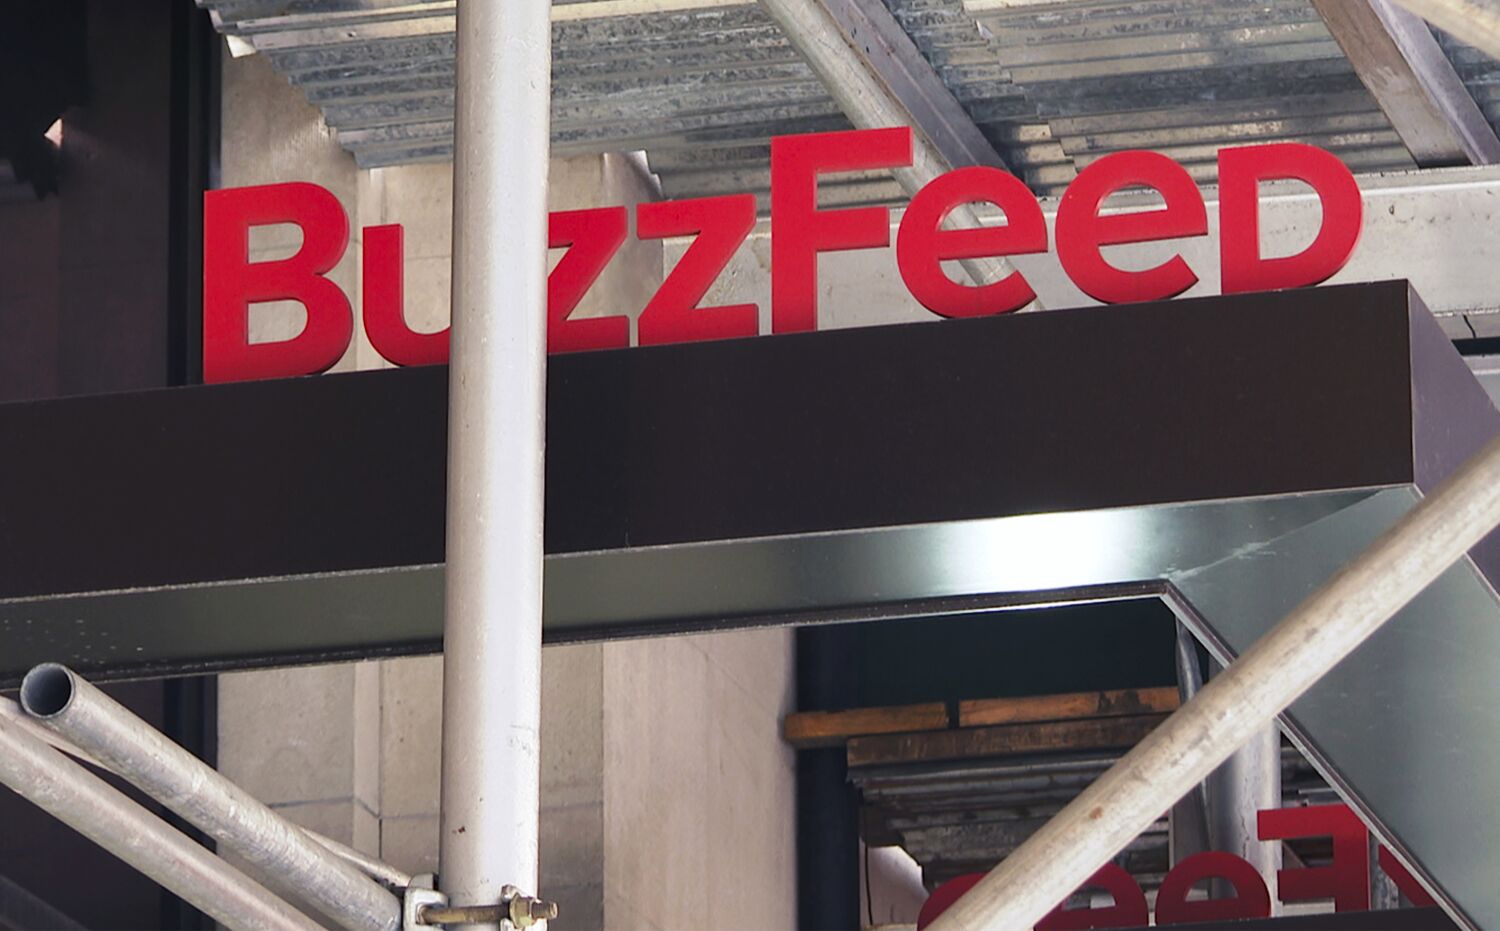 BuzzFeed News is shutting down as company cuts 15% of staff